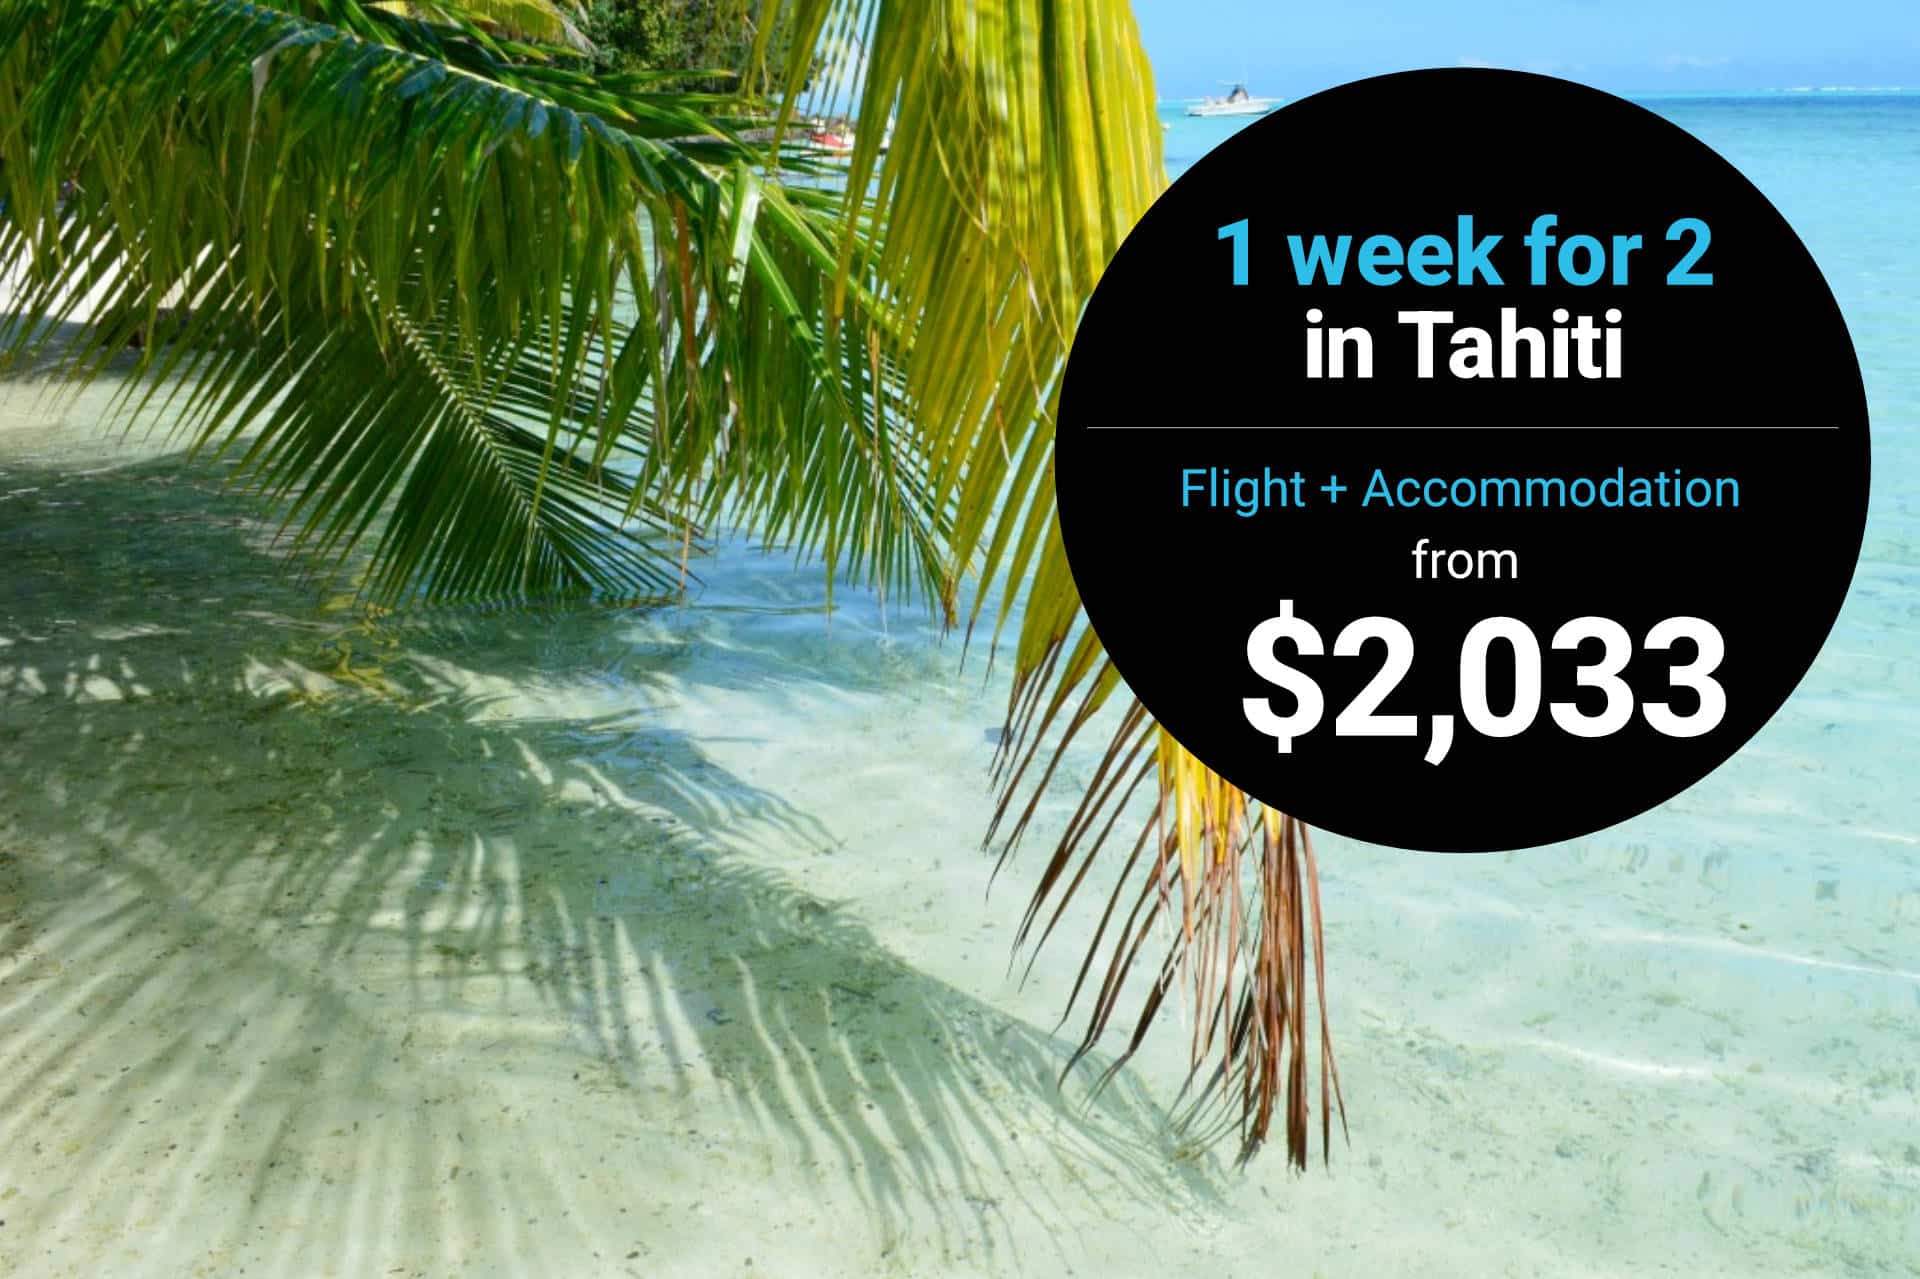 1 week for 2 travelers in Tahiti at best price with Delta Air Lines